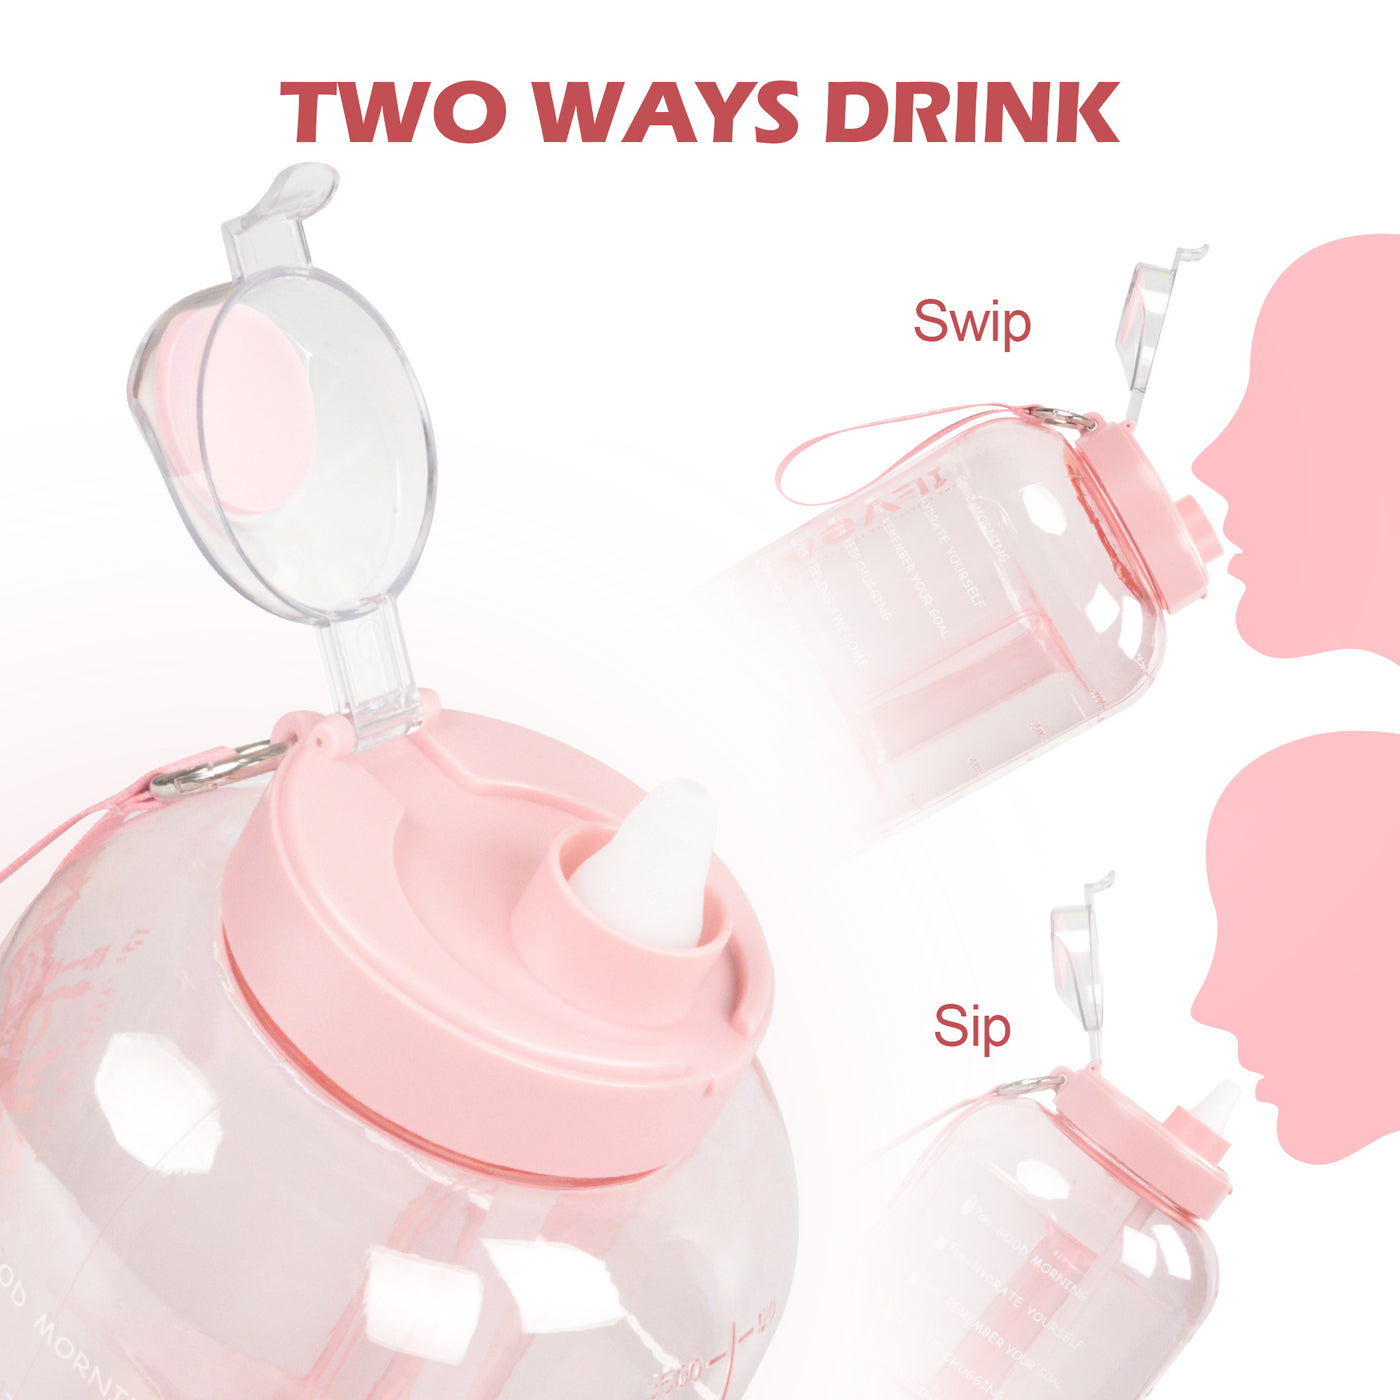 water bottles with two ways drink